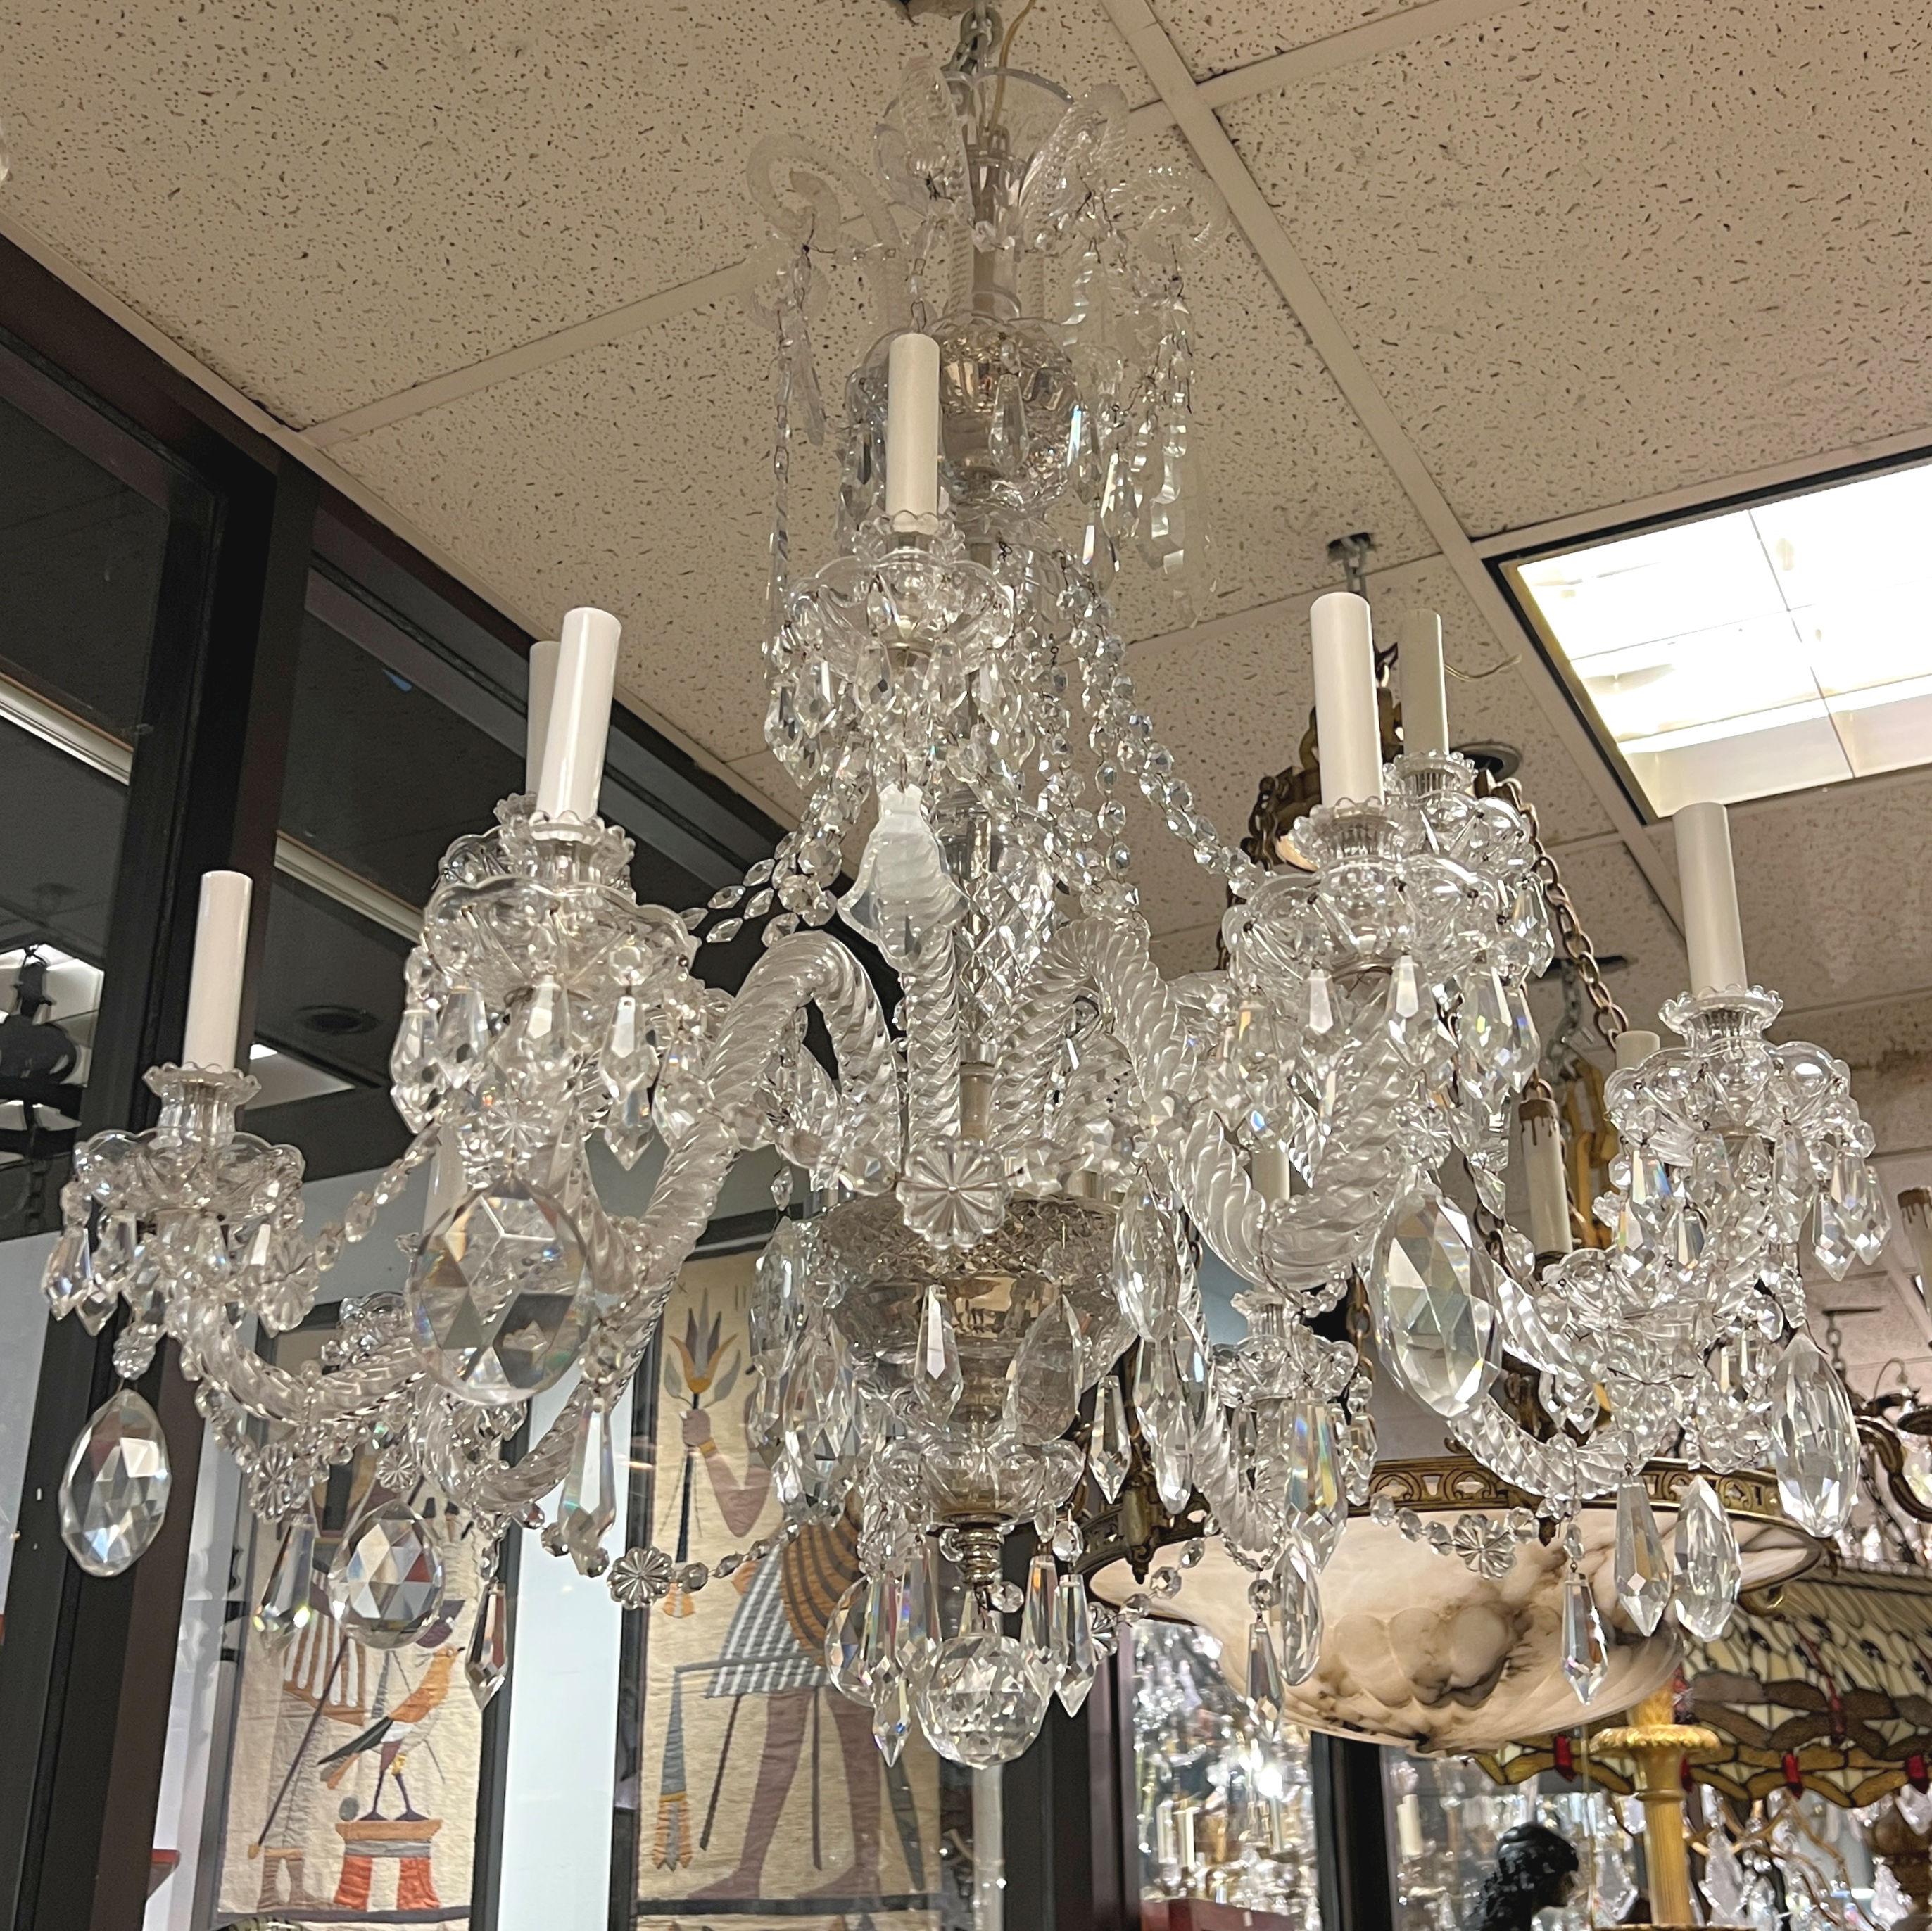 Very fine quality Mid century Georgian style crystal electrified 12 light chandelier.
Possibly by Waterford.